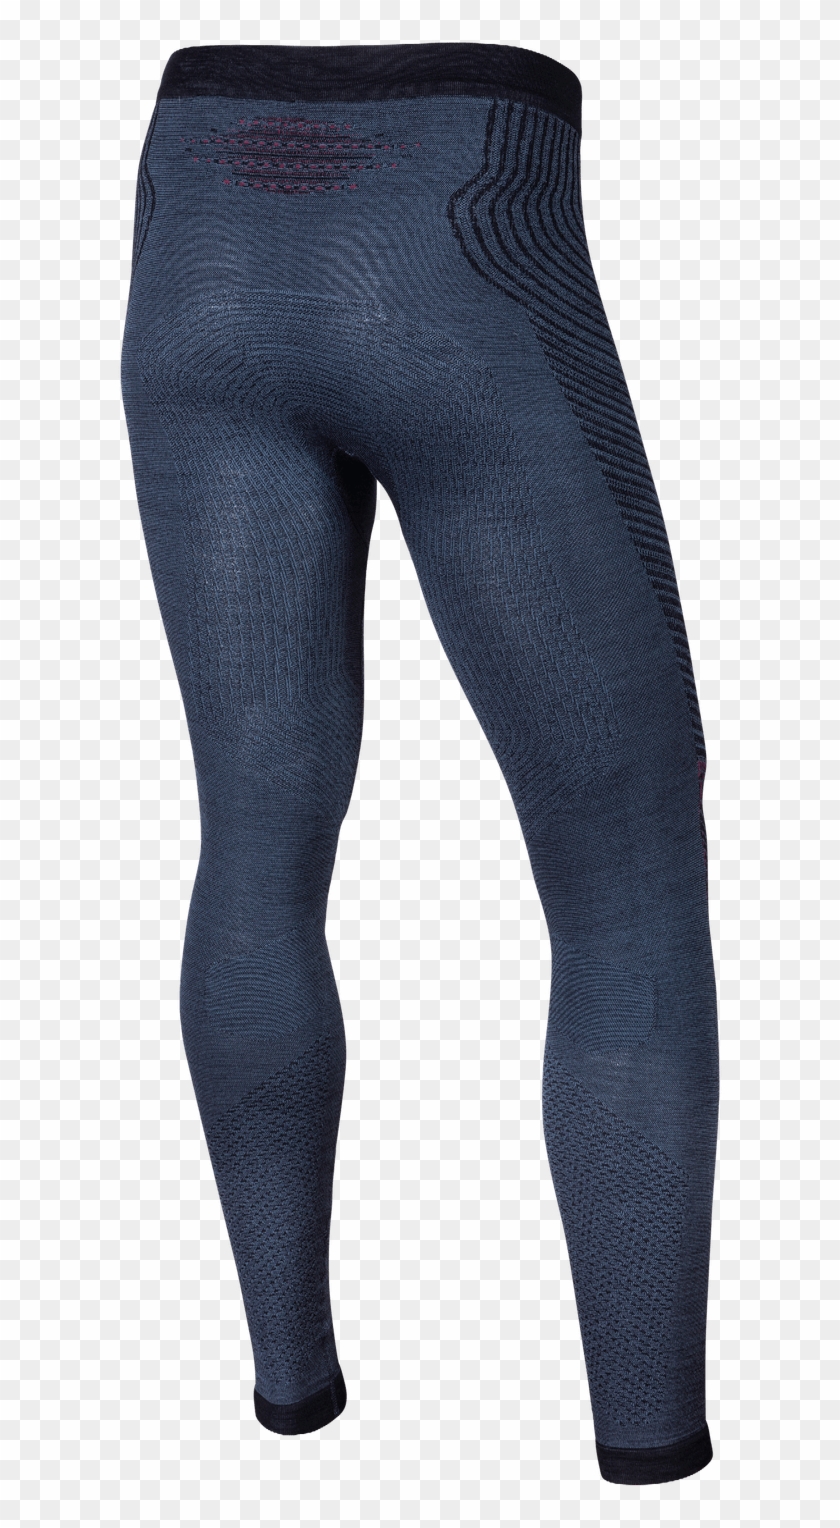 Tap To Zoom - Tights Clipart #3077818